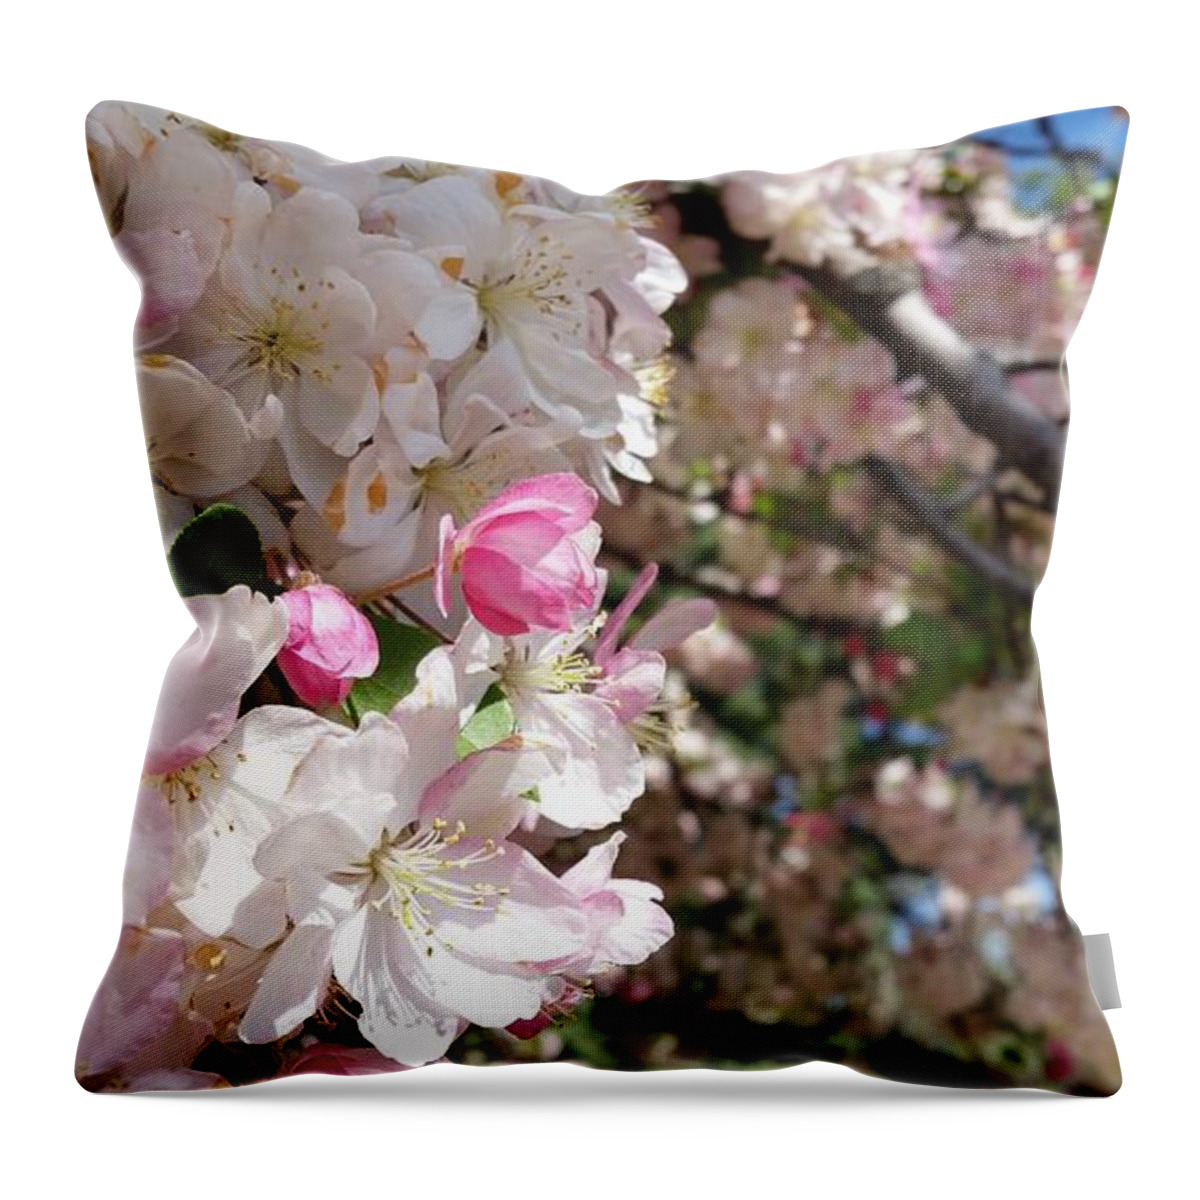 Apple Throw Pillow featuring the photograph Branched Apple by Caryl J Bohn